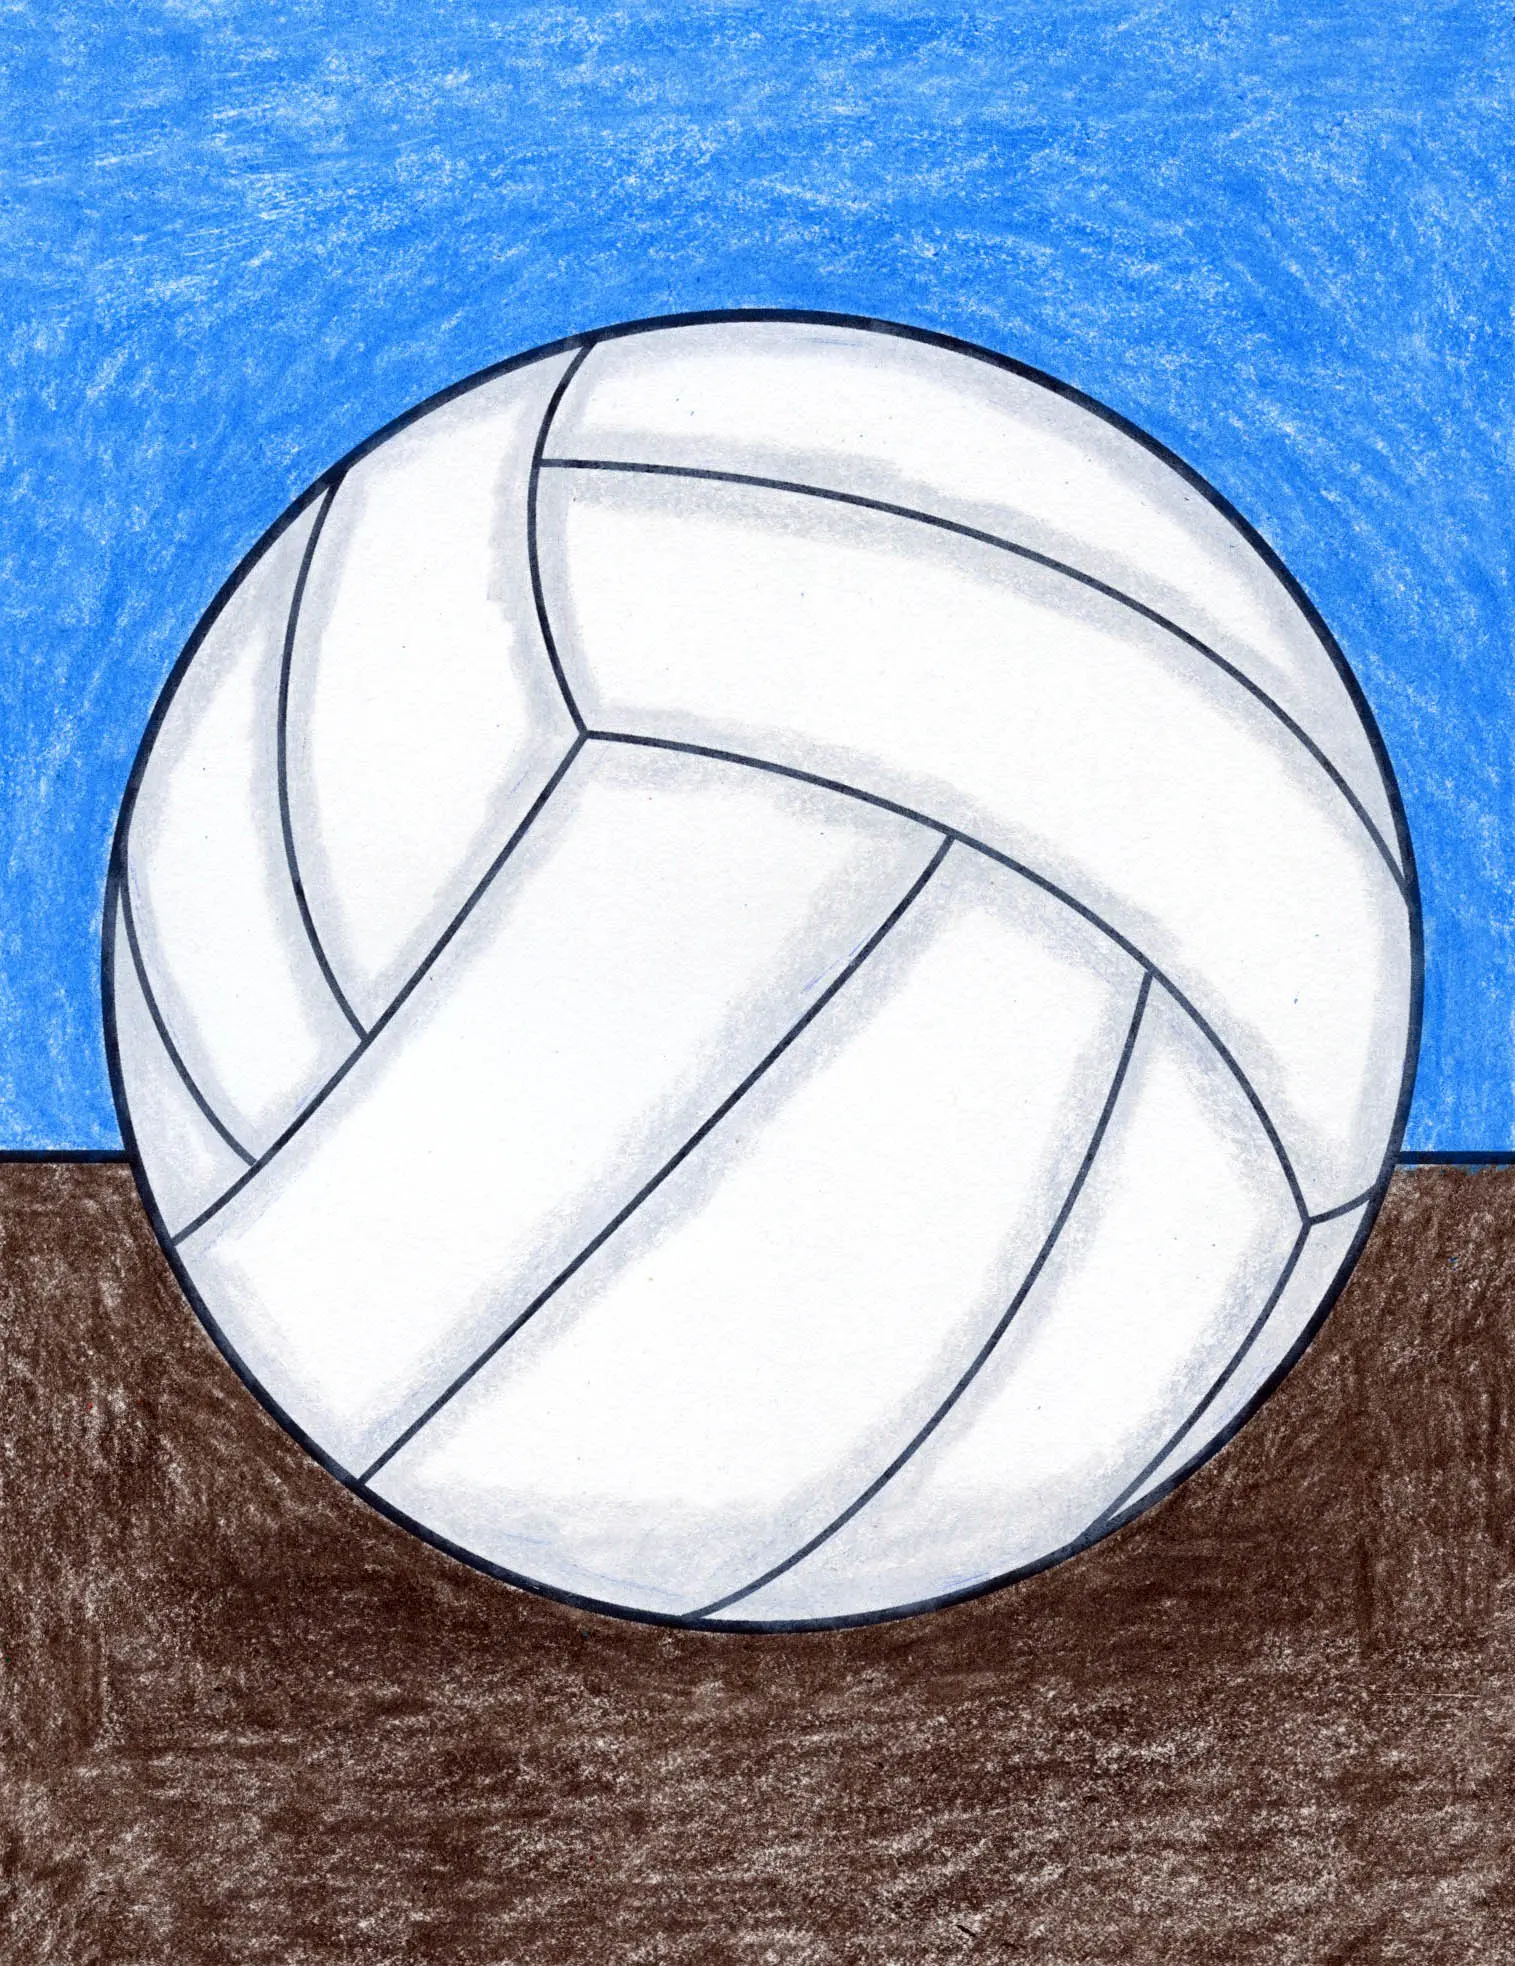 Easy How to Draw a Soccer Ball Tutorial and Soccer Ball Coloring Page